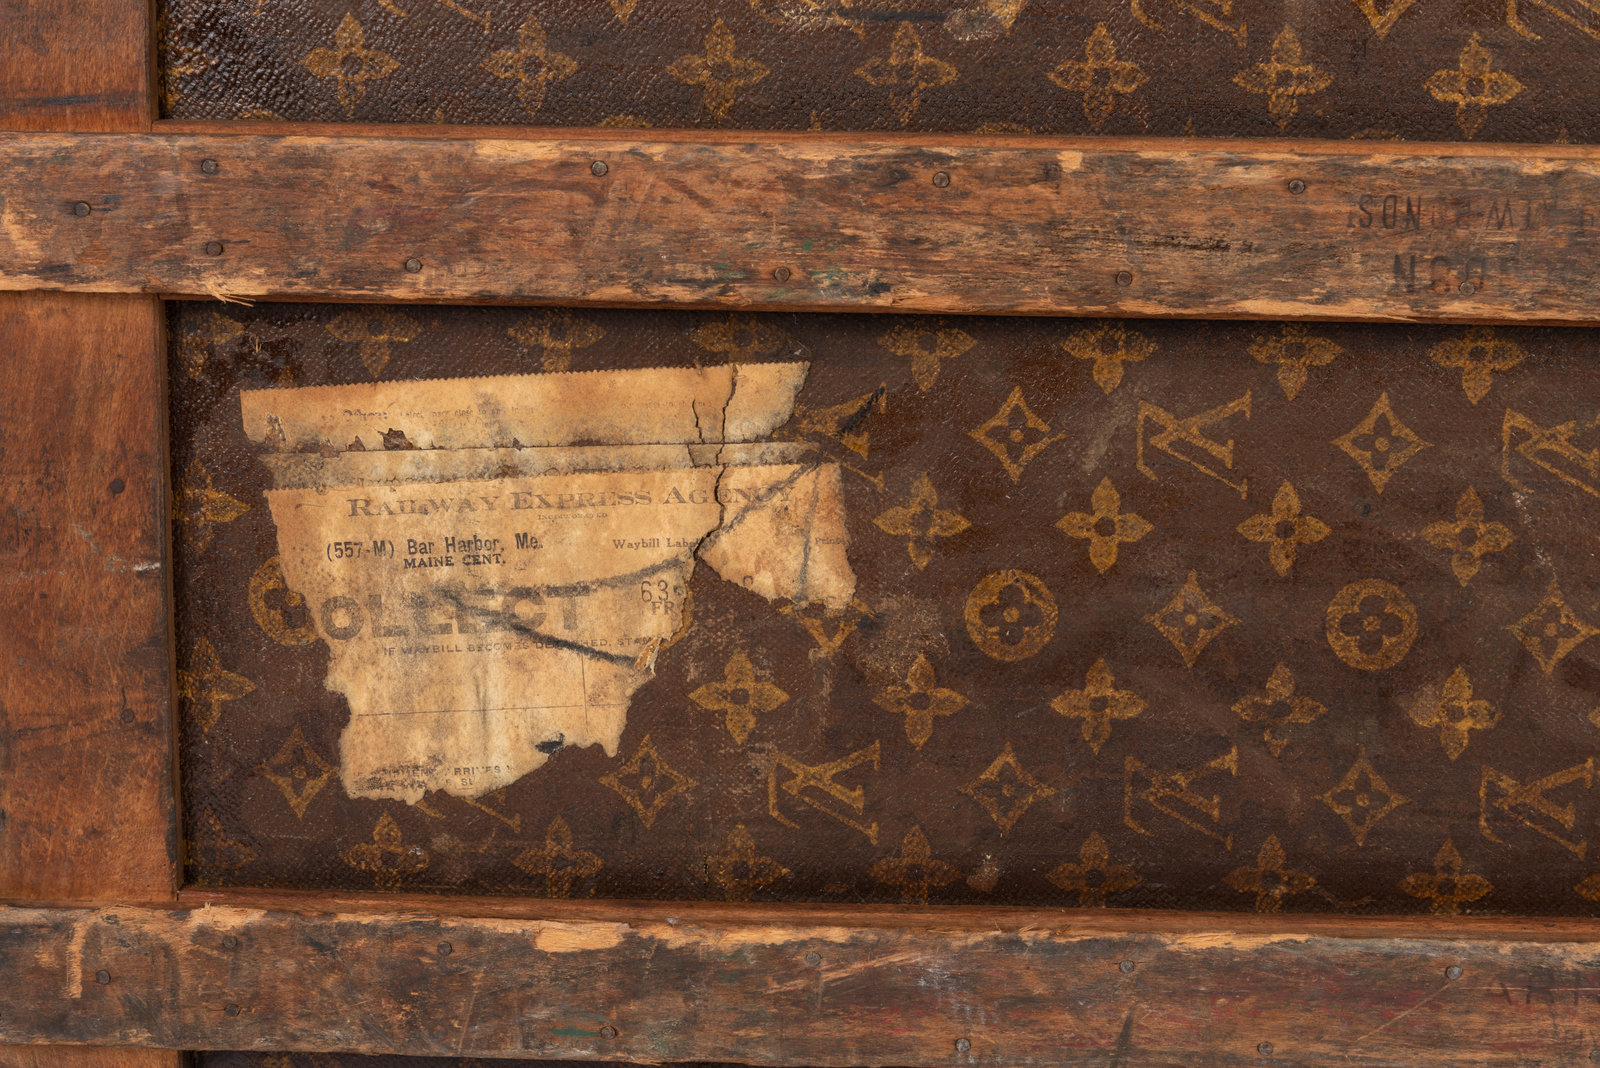 A trunk by Louis Vuitton, late 1800s. - Bukowskis